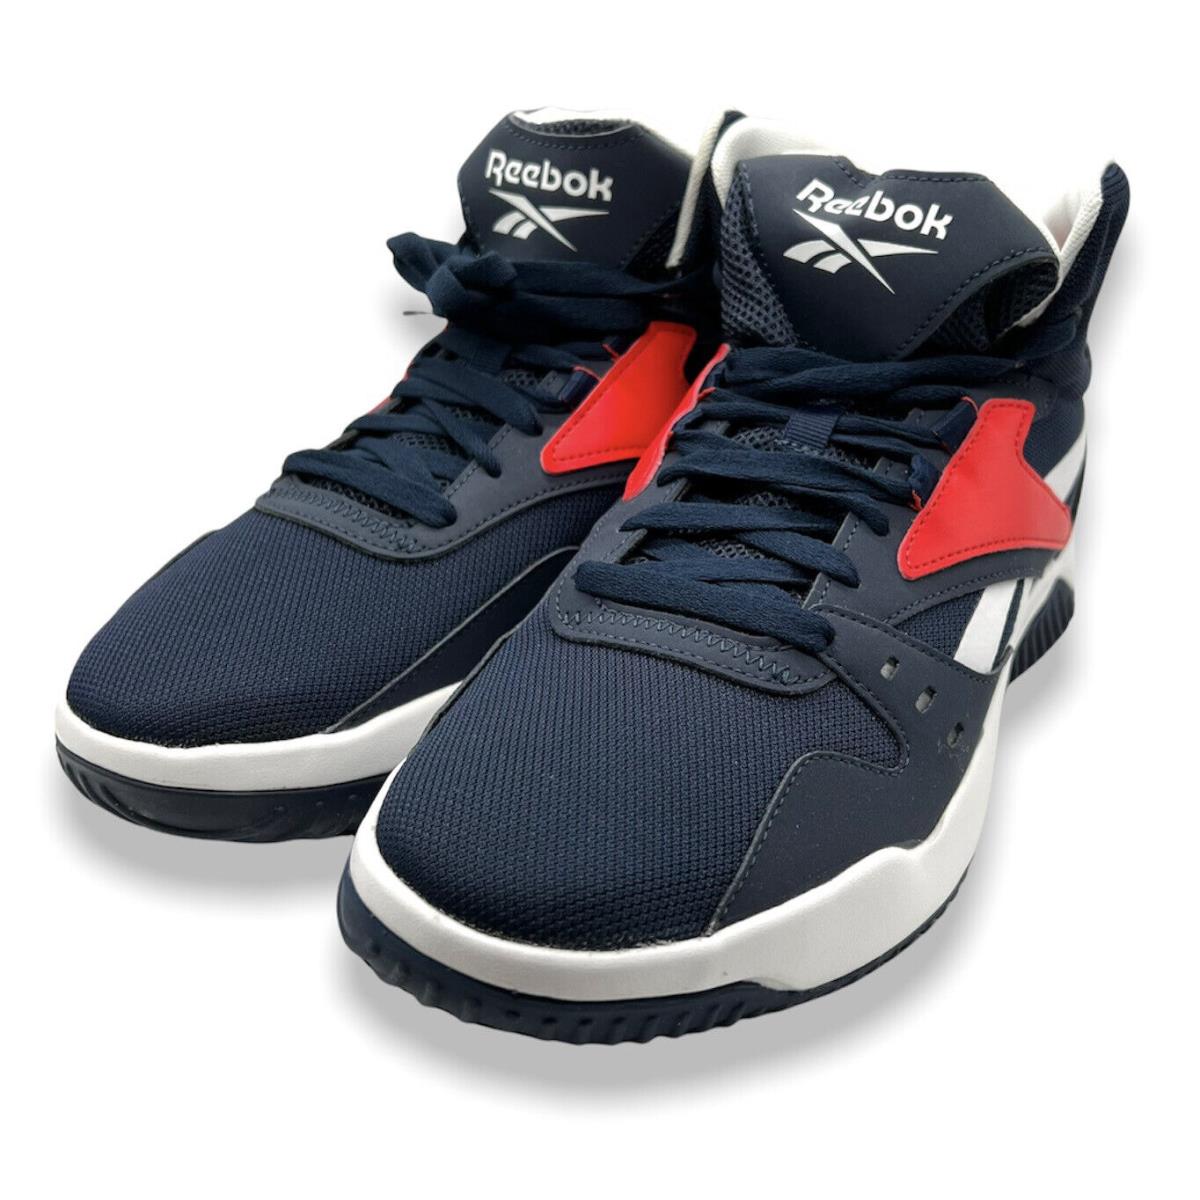 Reebok Mens Navy FV4472 BB OS Mid Top Athletic Basketball Shoes Size US 8